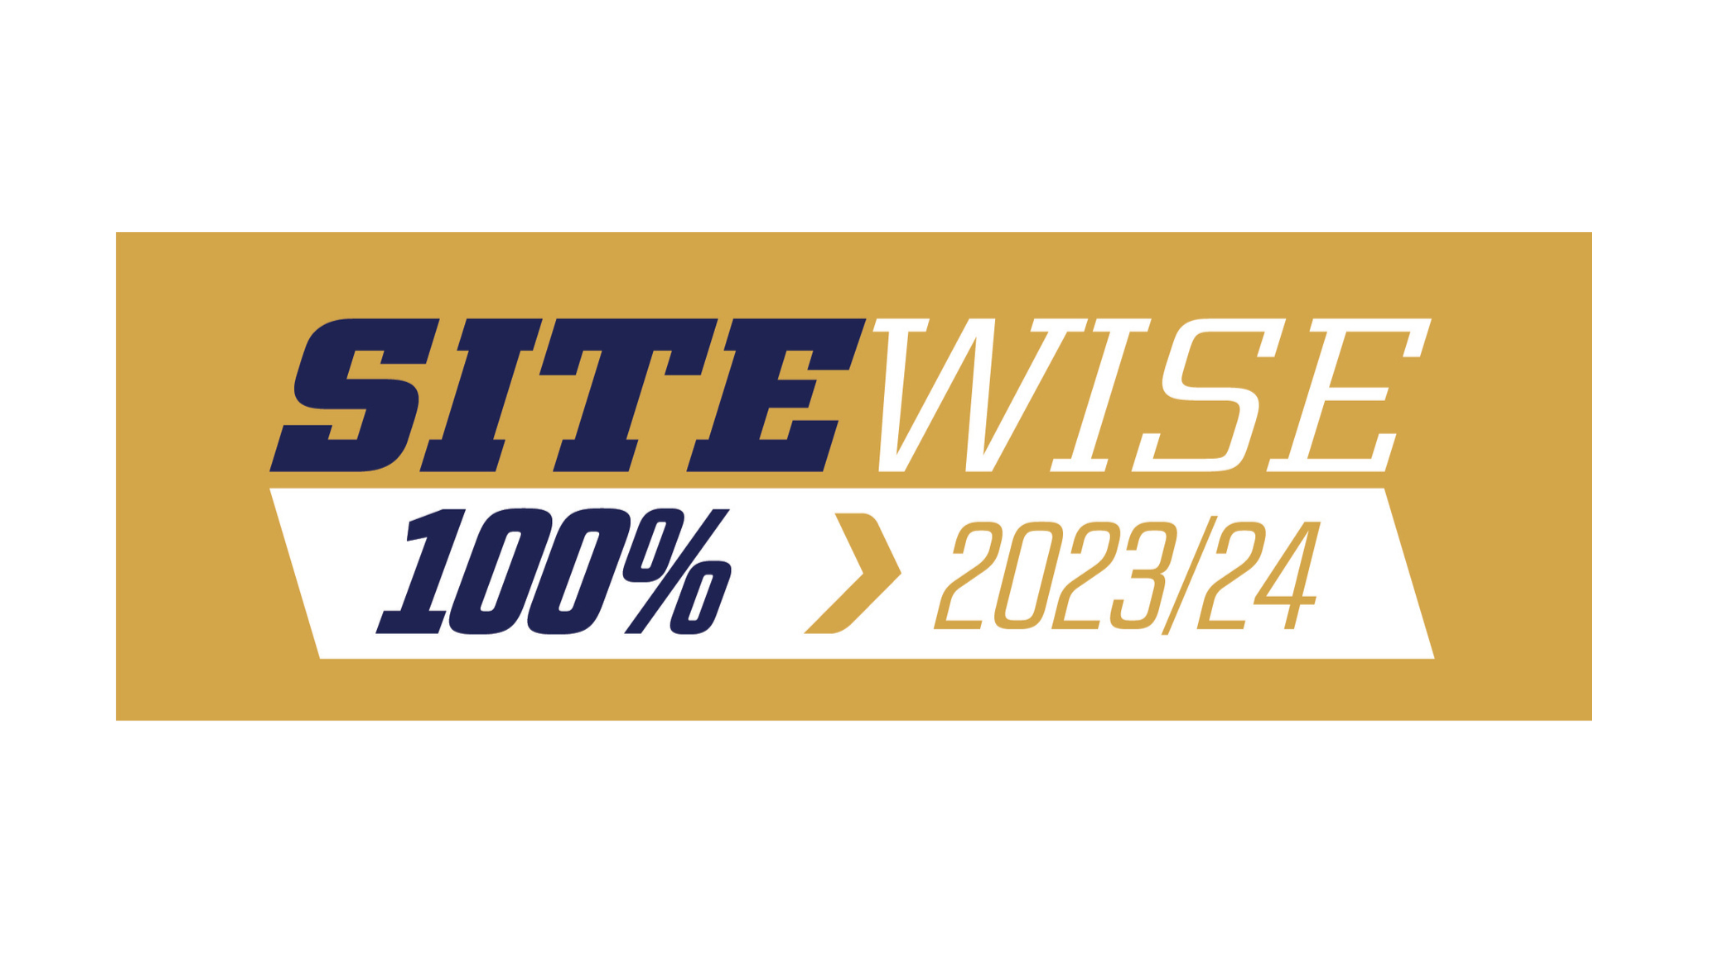 Site Wise 100% 2023/24